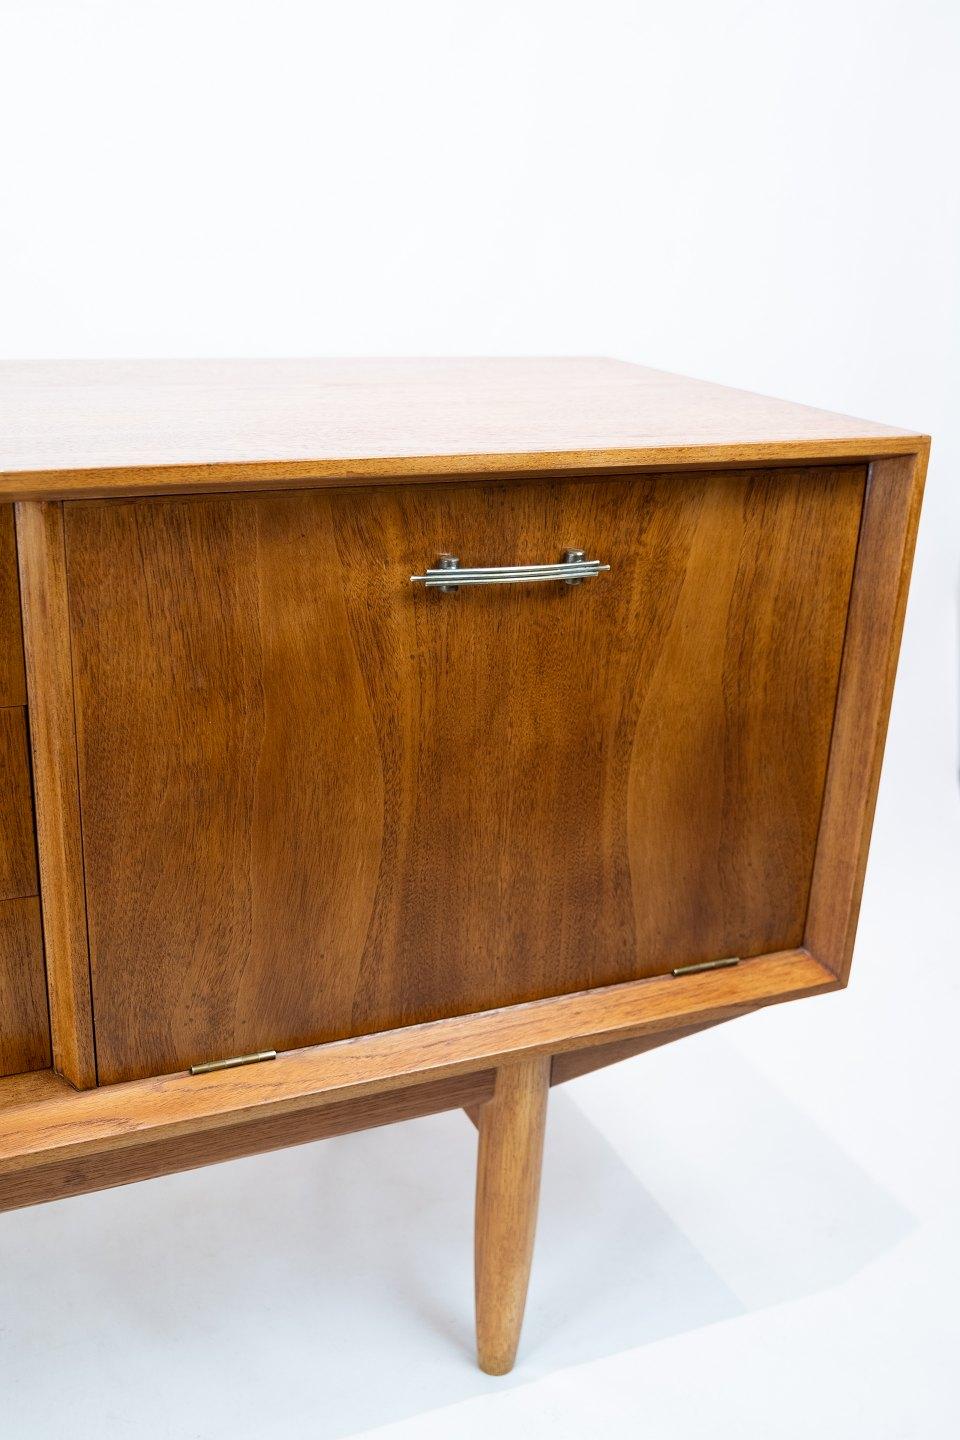 Mid-20th Century Sideboard in Teak of Danish Design from the 1960s